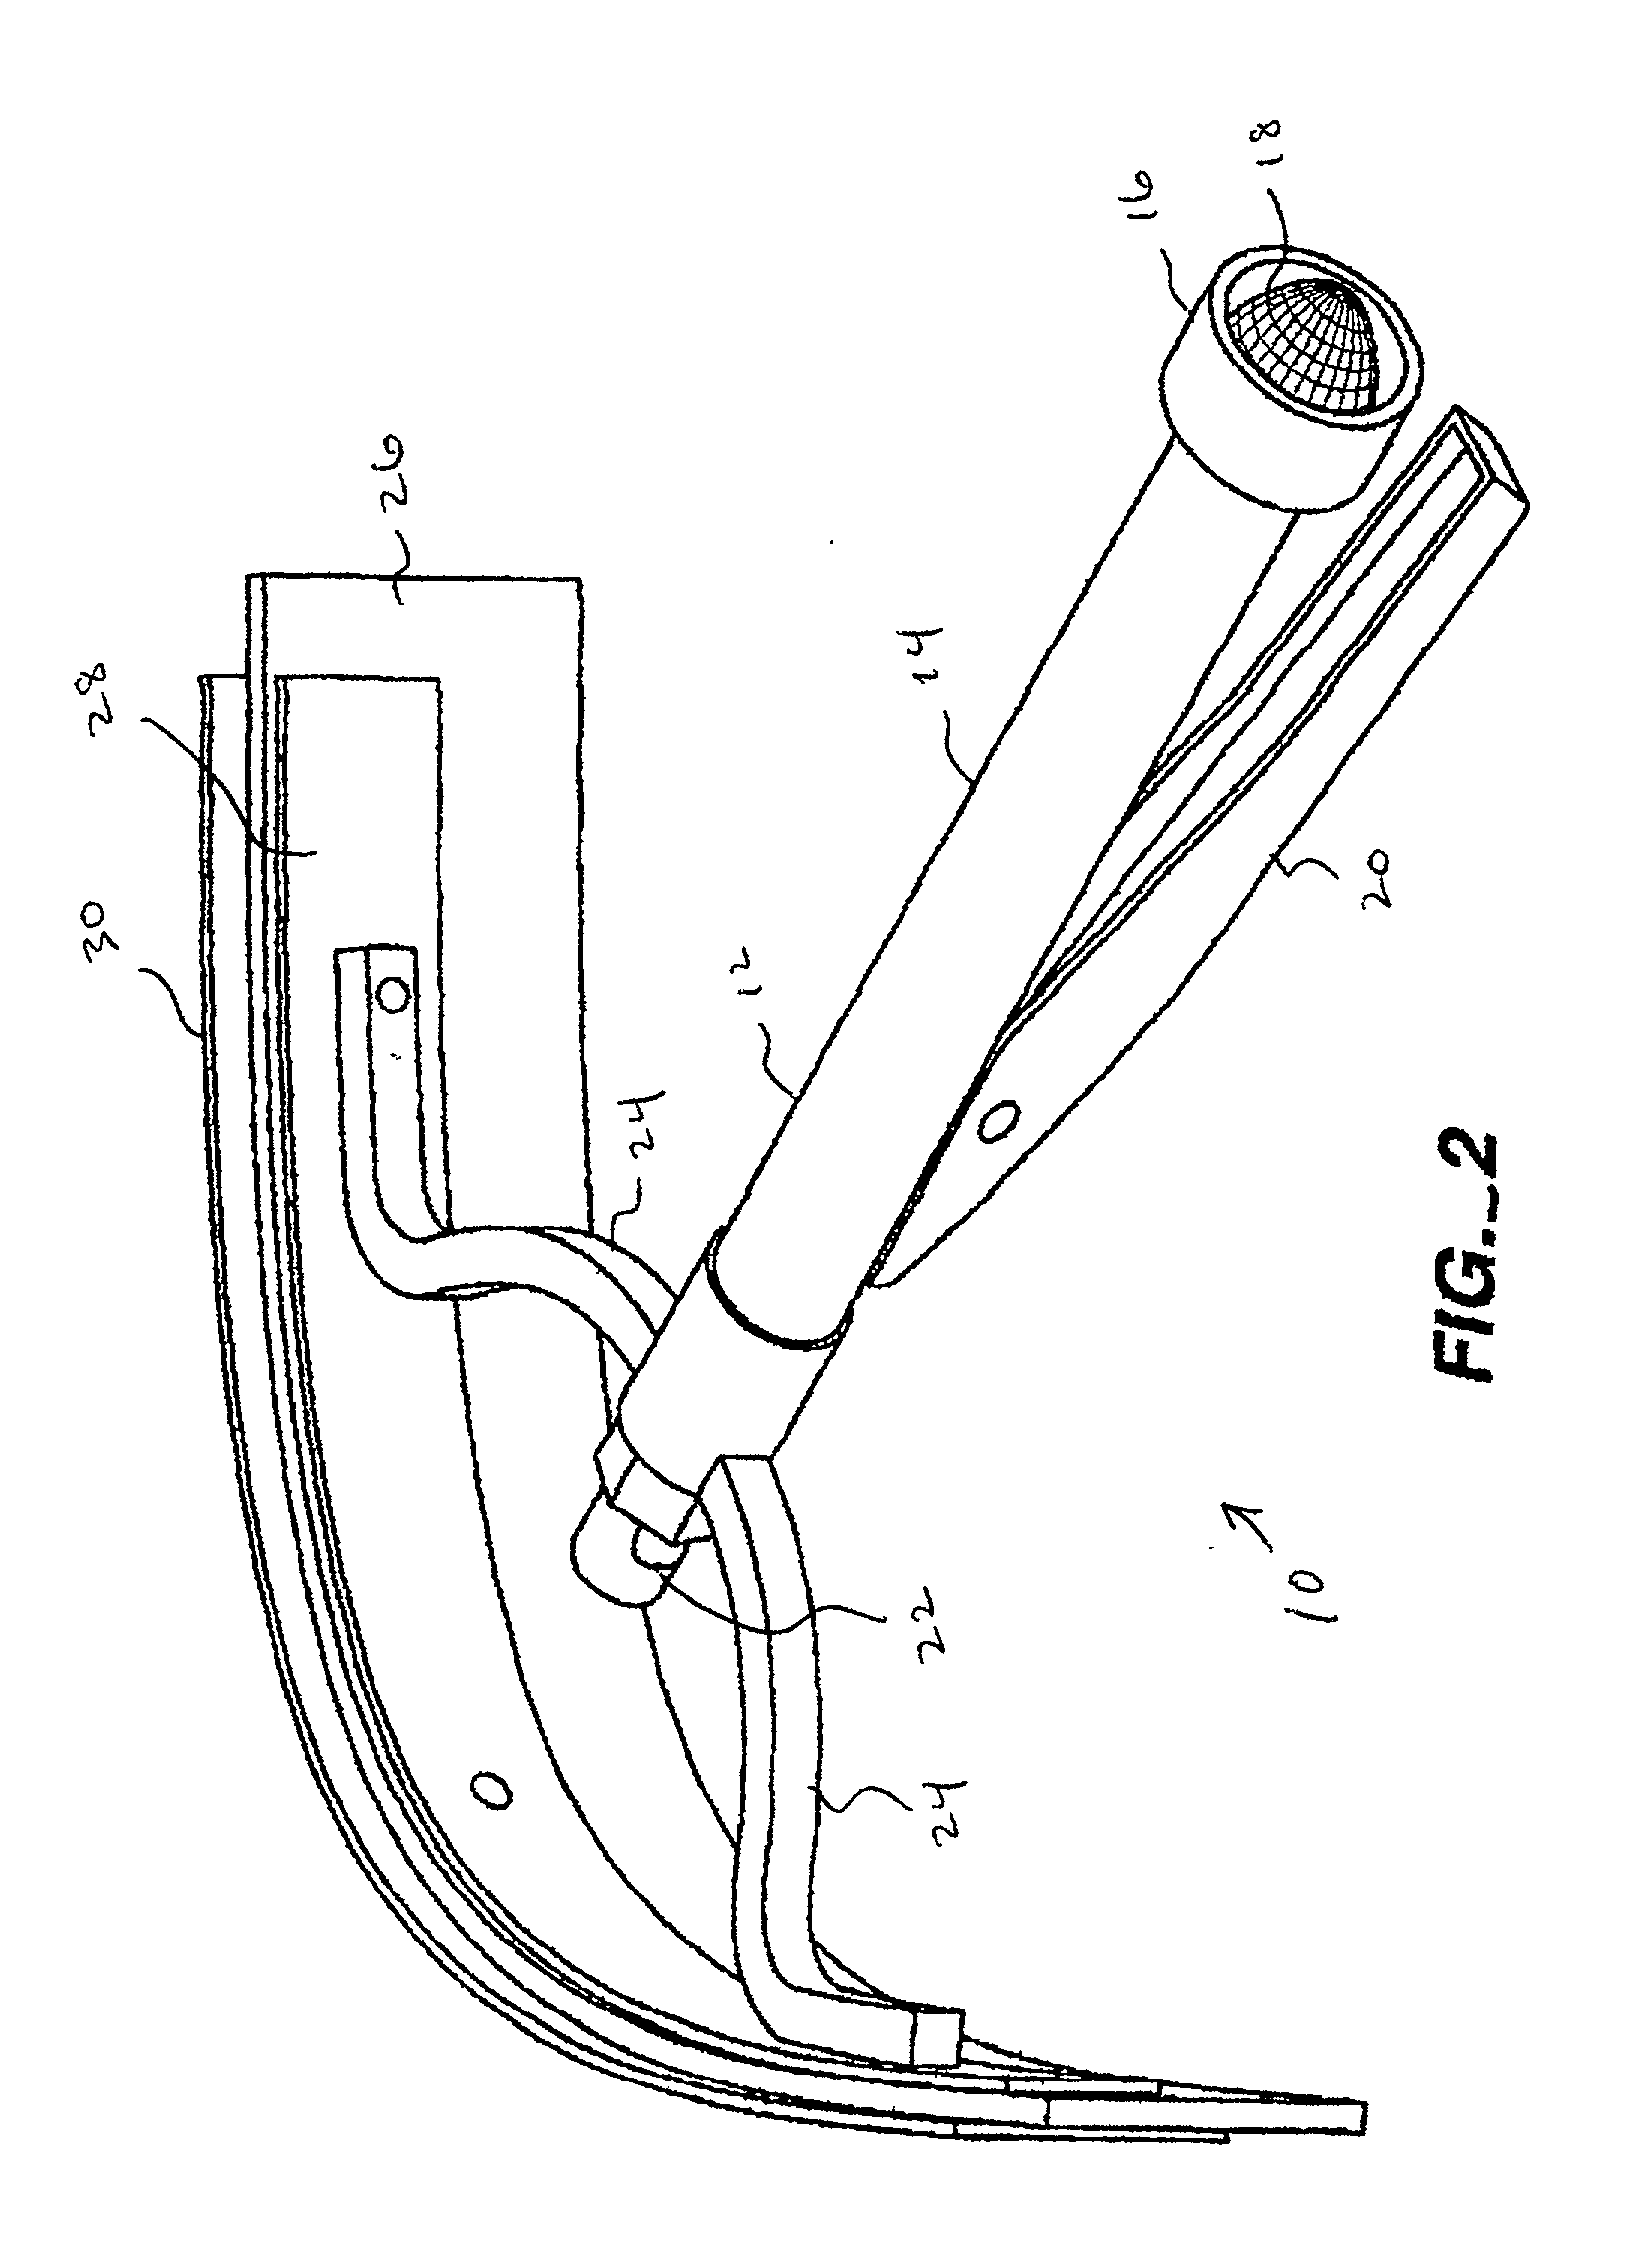 Animal grooming squeegee apparatus